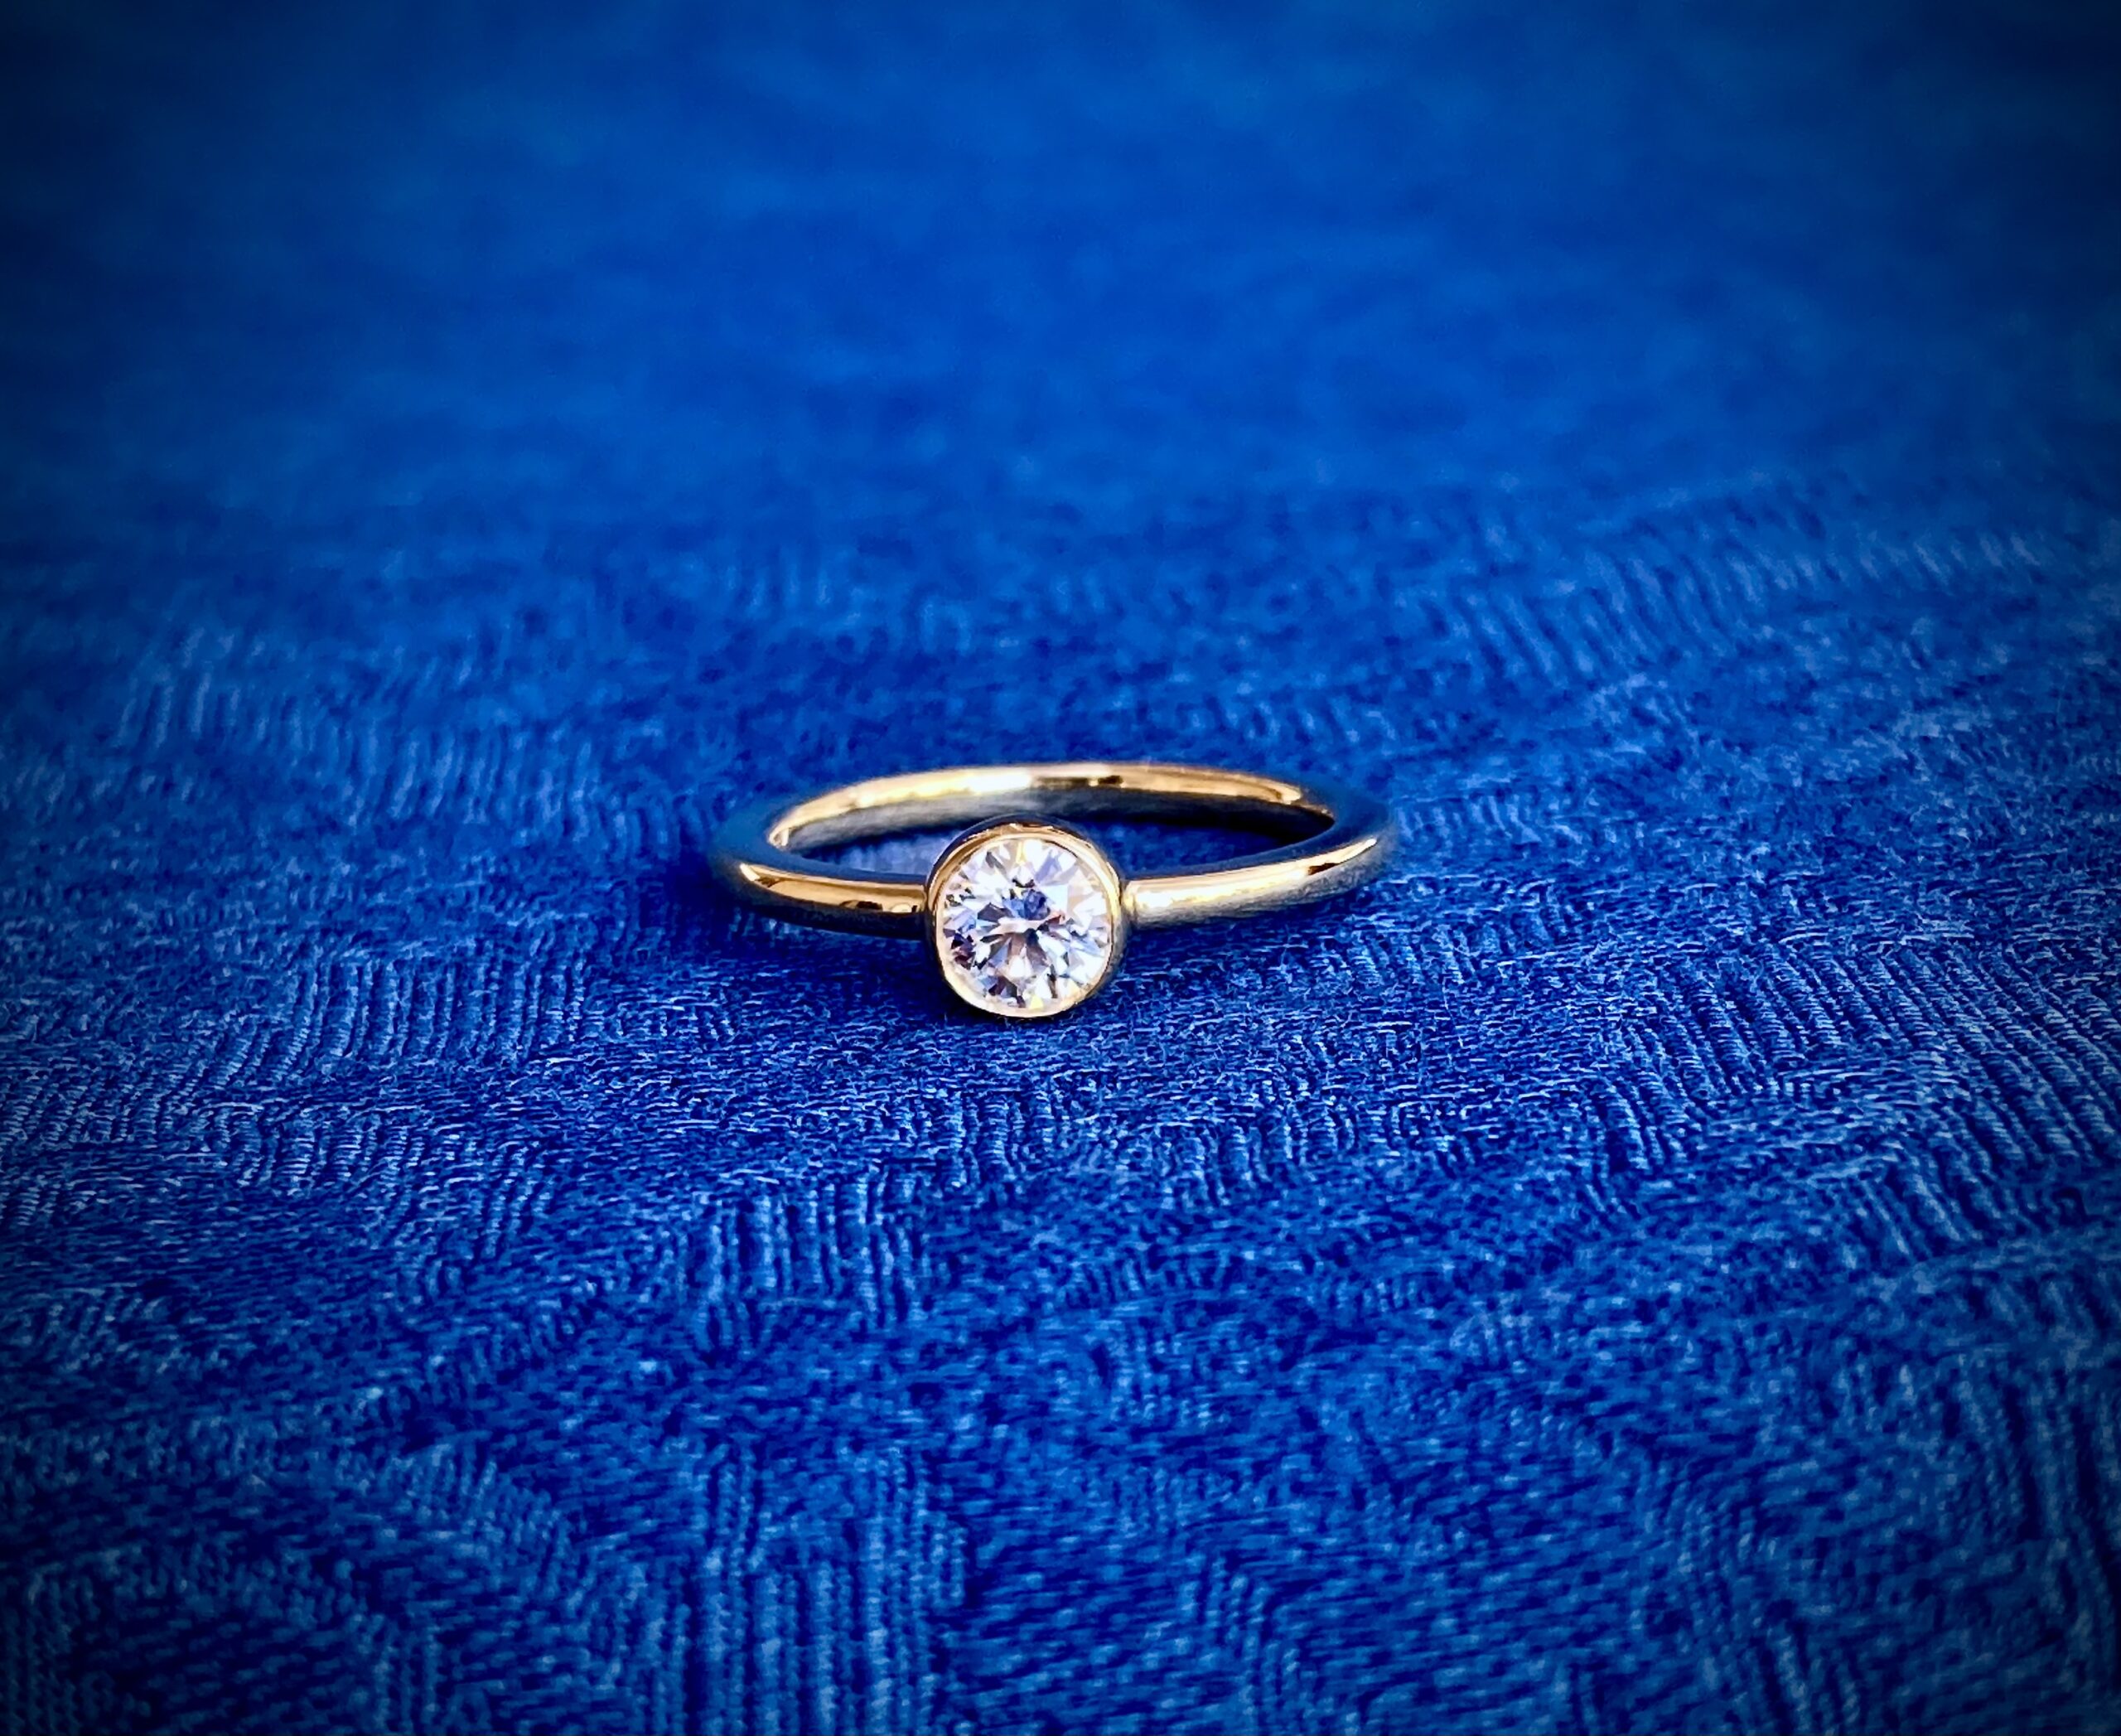 Let us help you with the ring for your proposal!